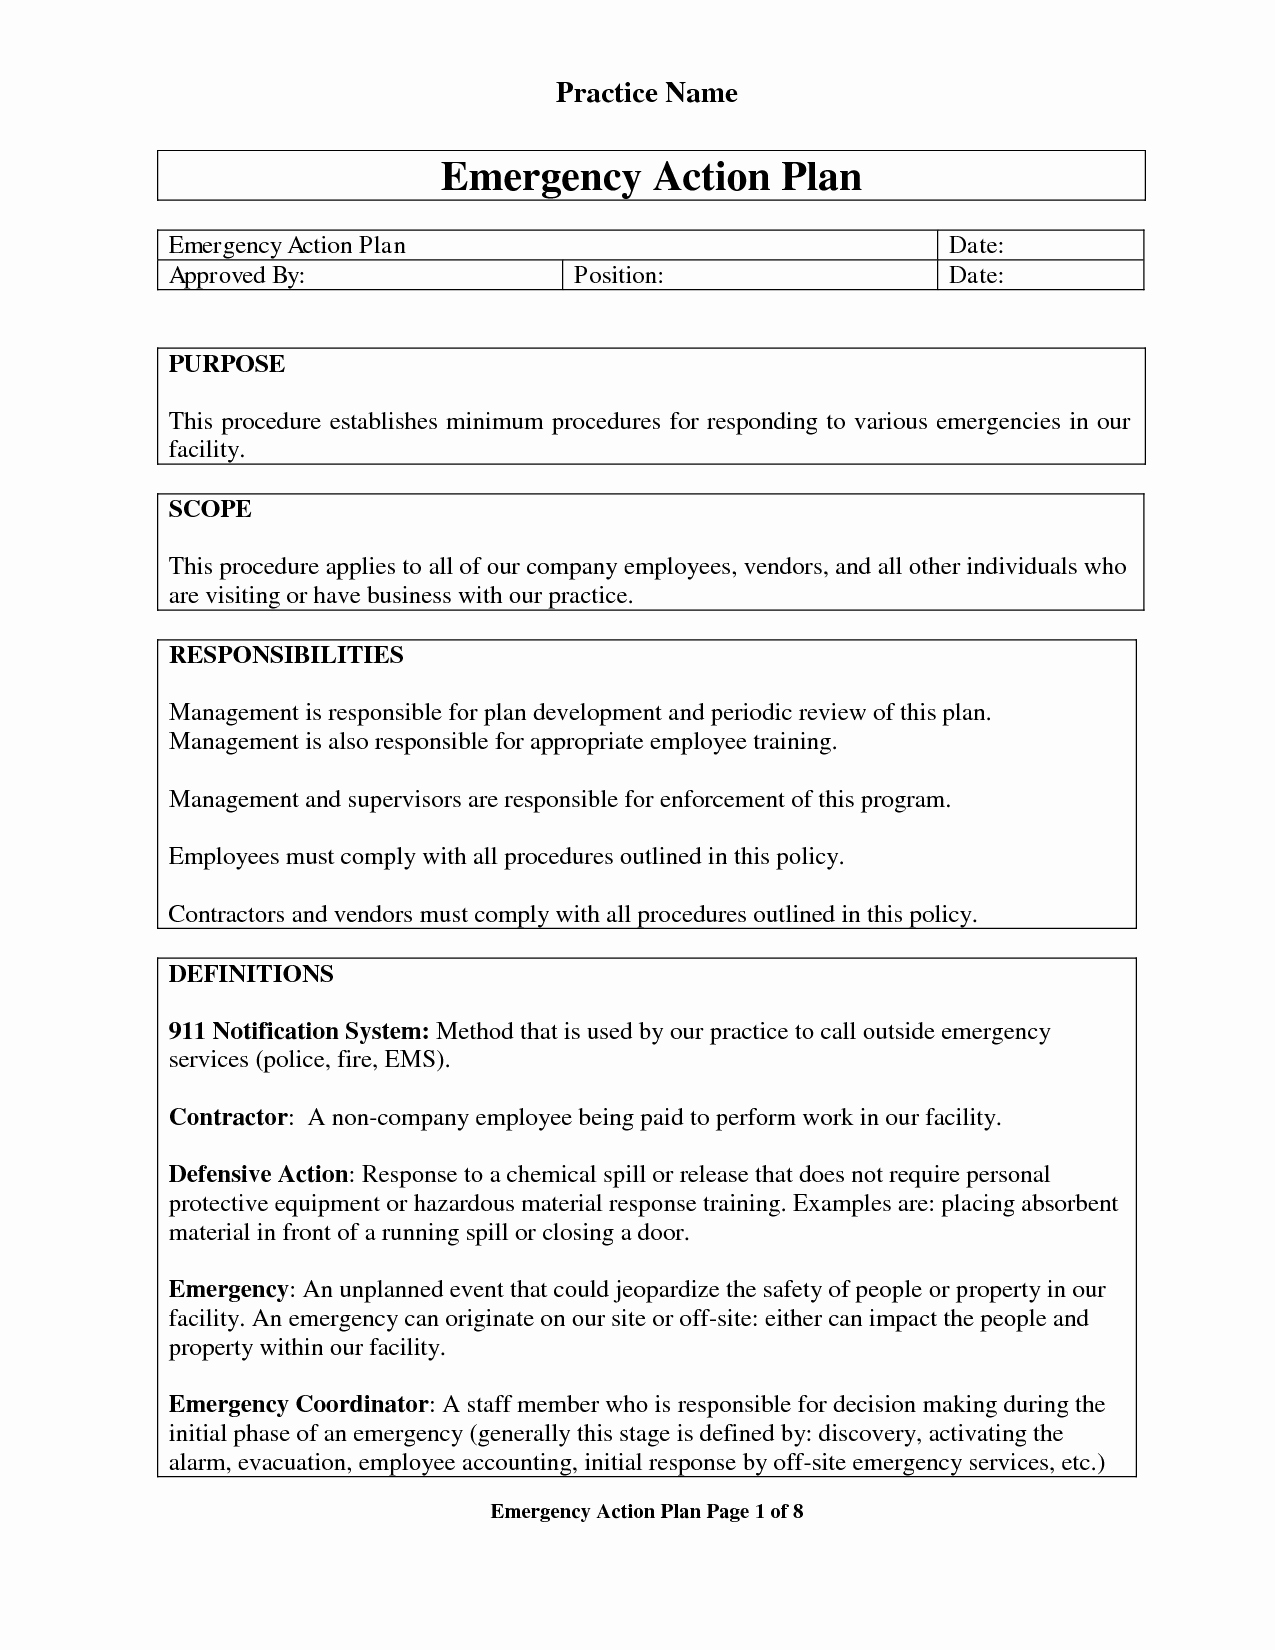 Emergency Action Plan Sample New Emergency Action Plan Template